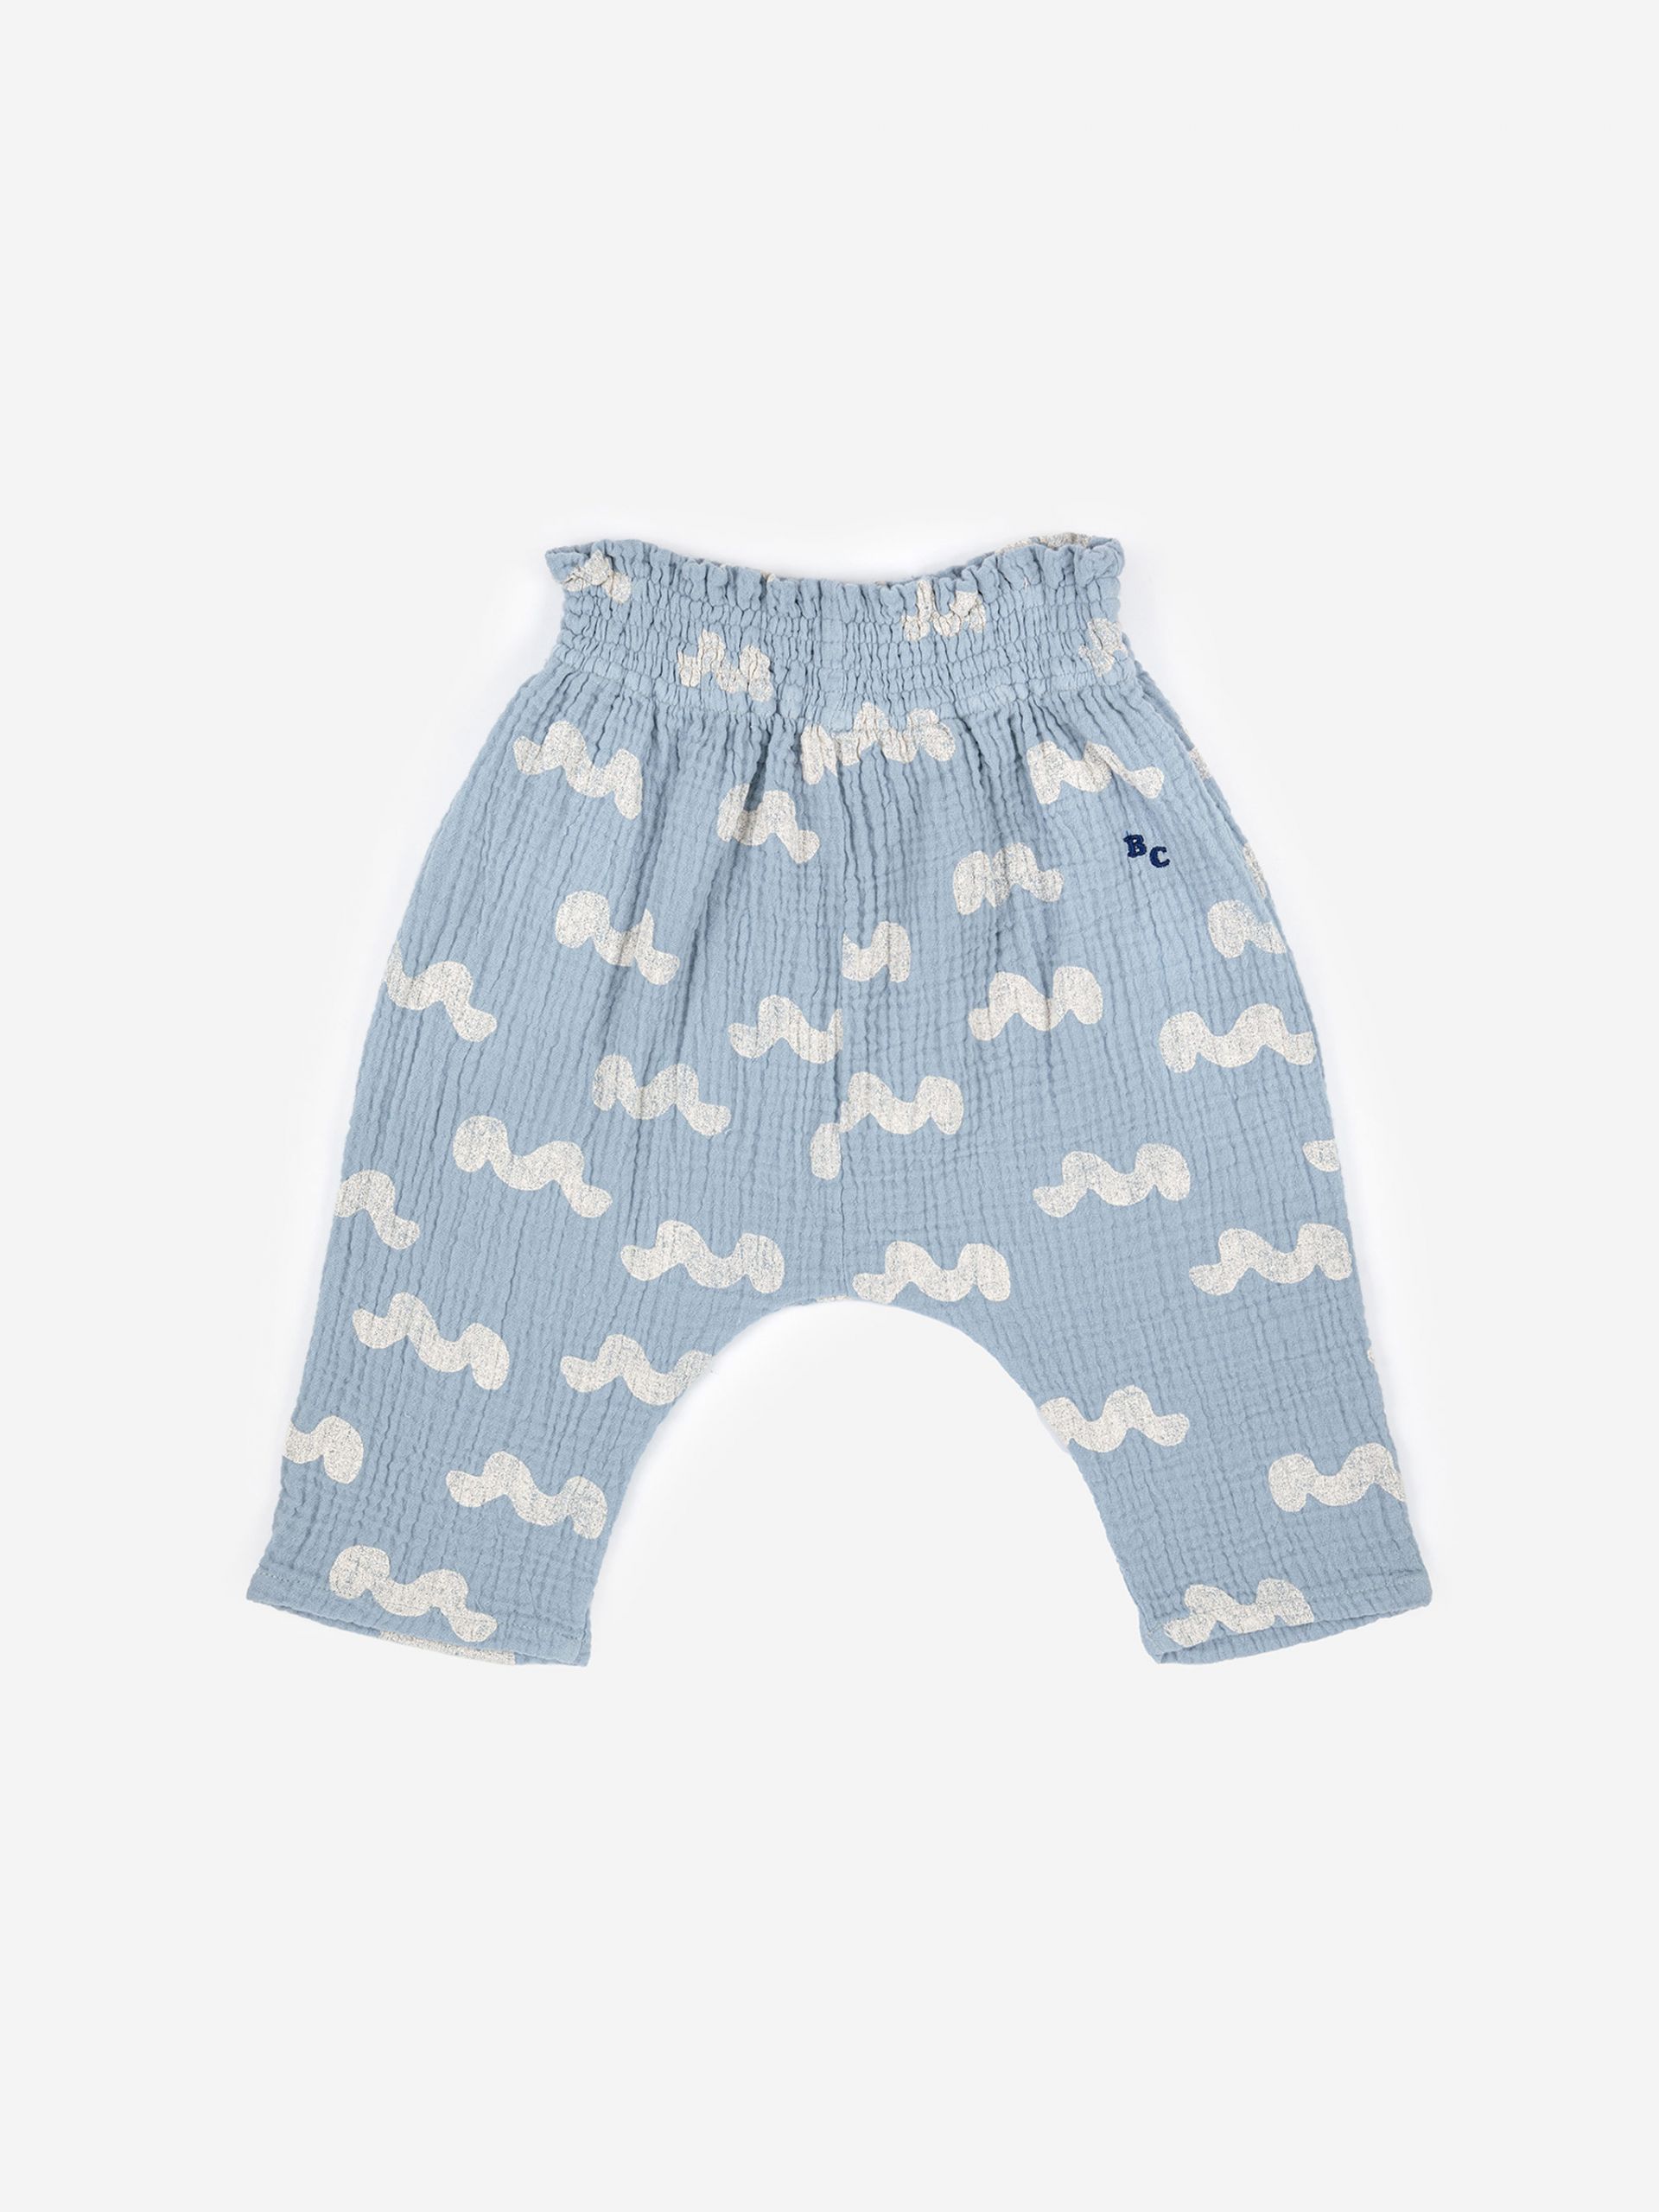 Bobo Choses Baggy Trousers 'Waves All Over'